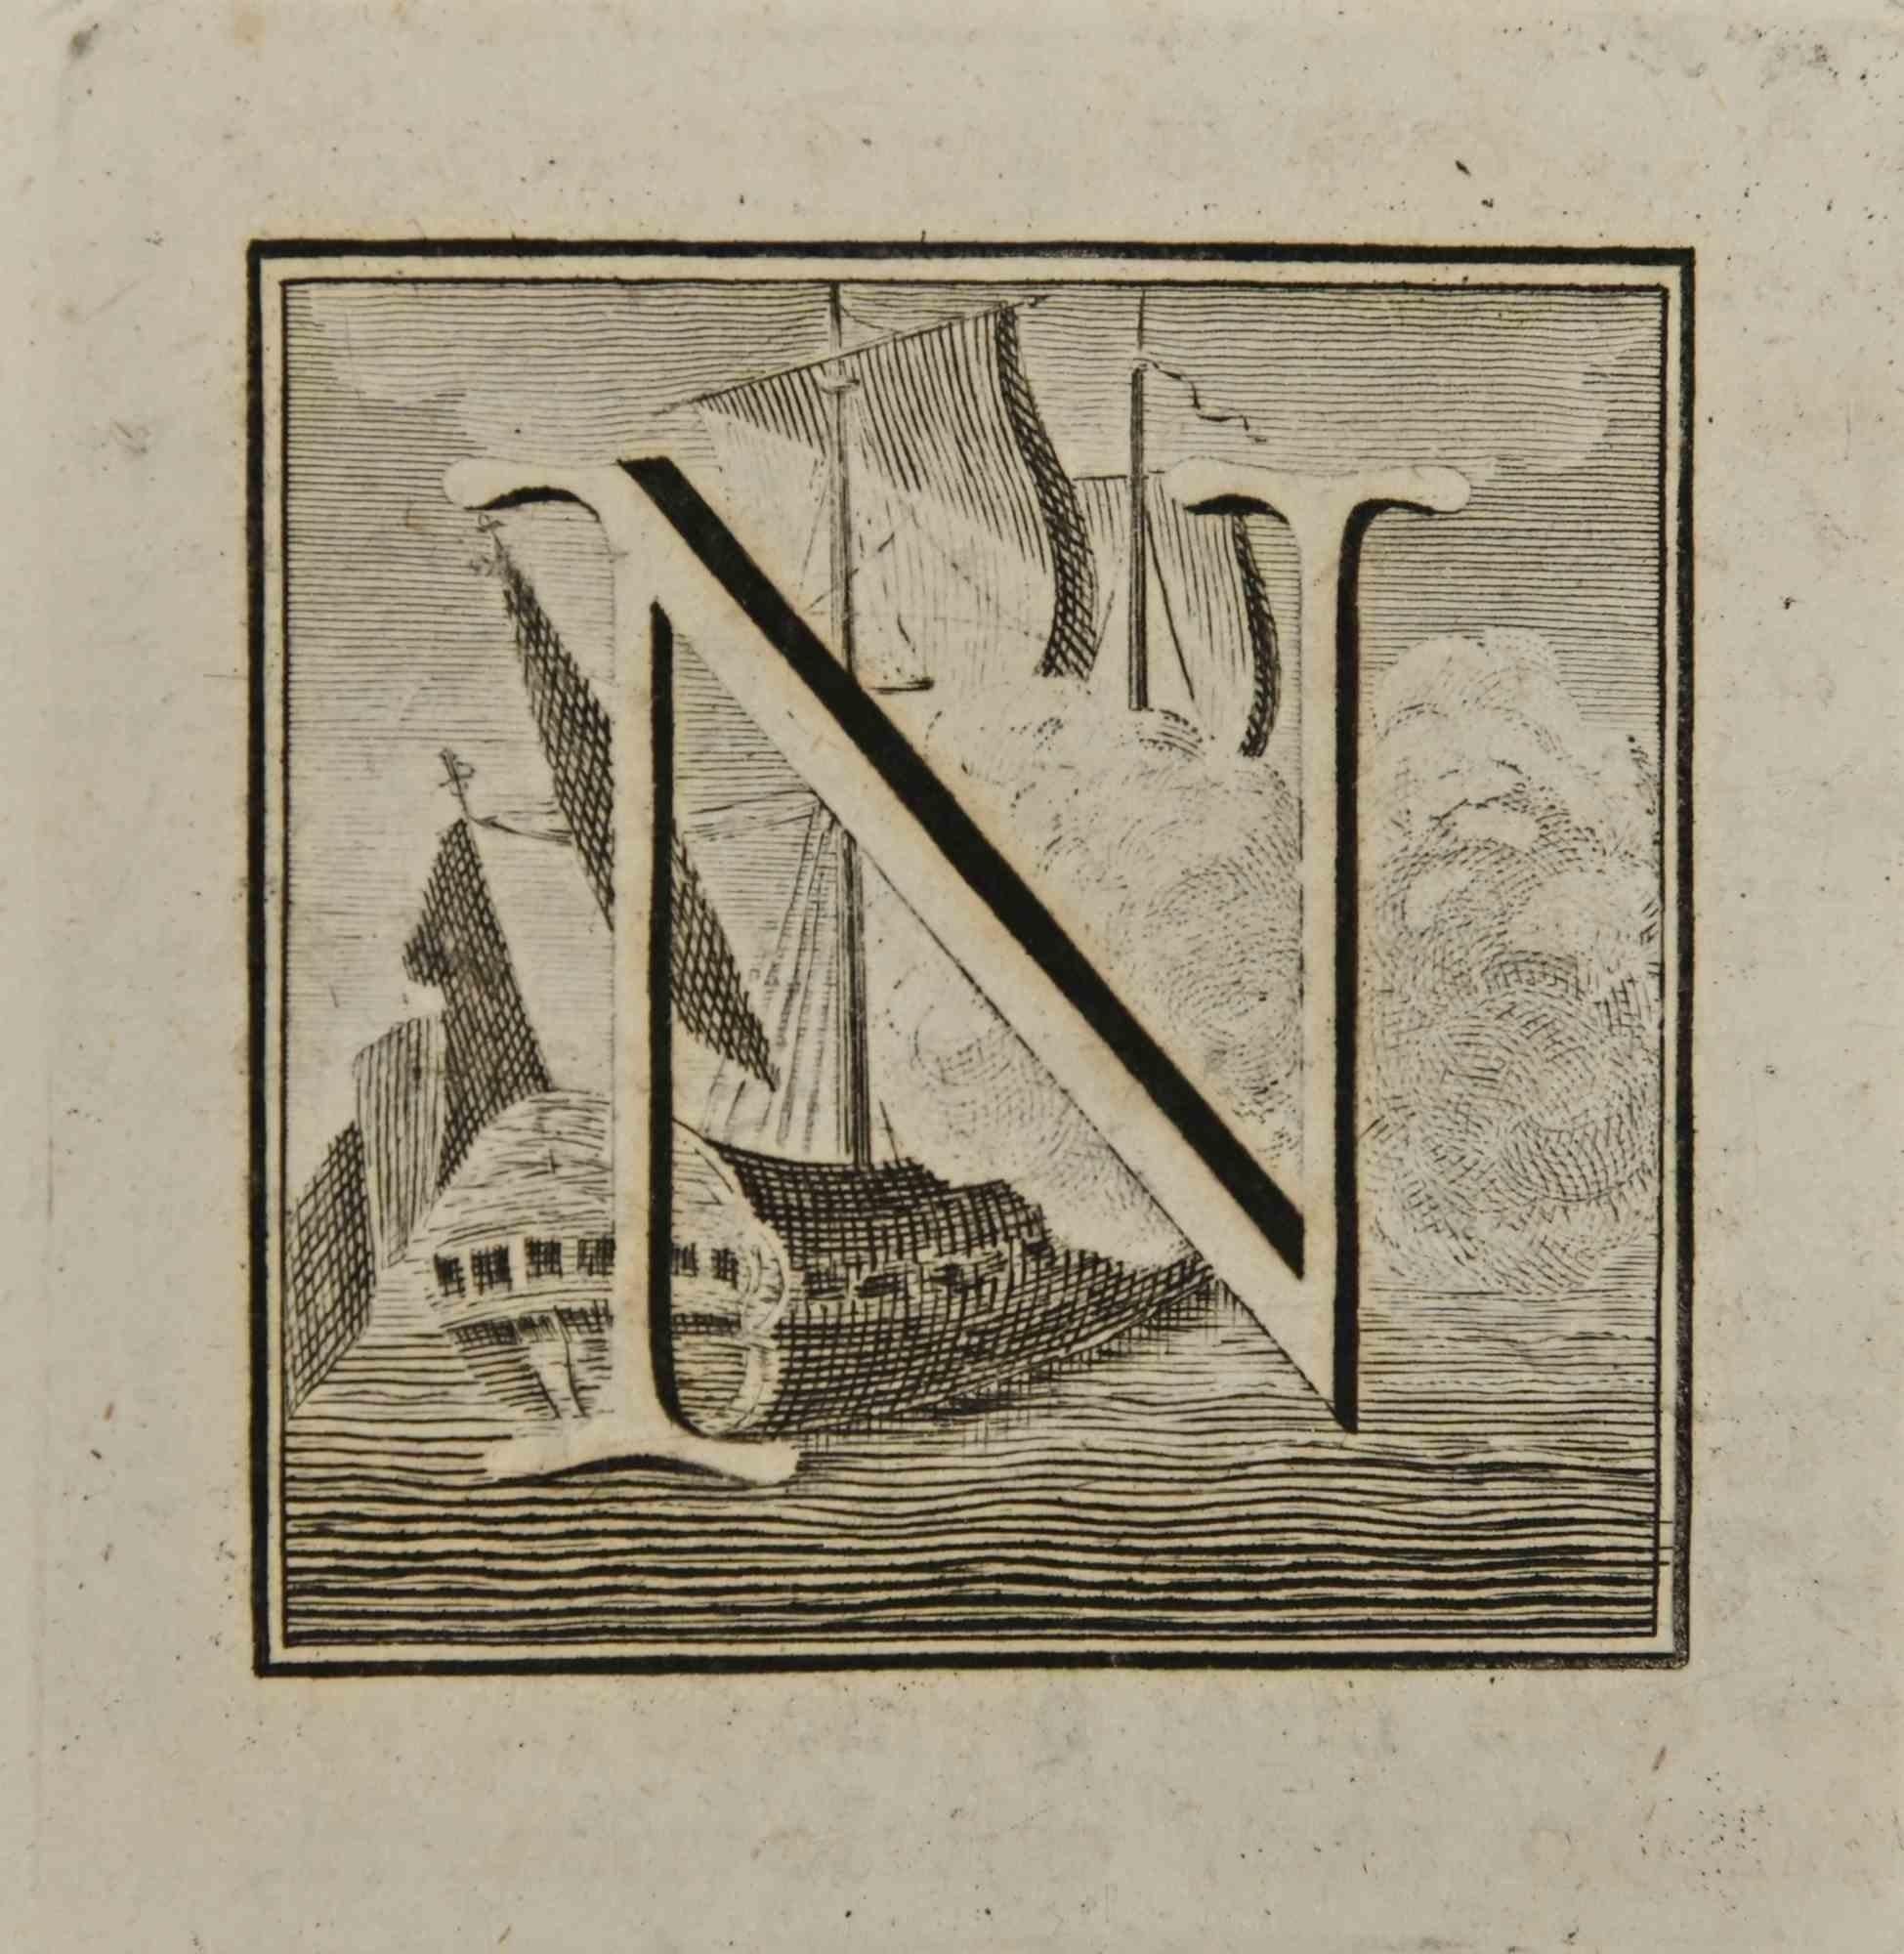 Letter of the Alphabet N,  from the series "Antiquities of Herculaneum", is an etching on paper realized by Luigi Vanvitelli in the 18th century.

Good conditions.

The etching belongs to the print suite “Antiquities of Herculaneum Exposed”